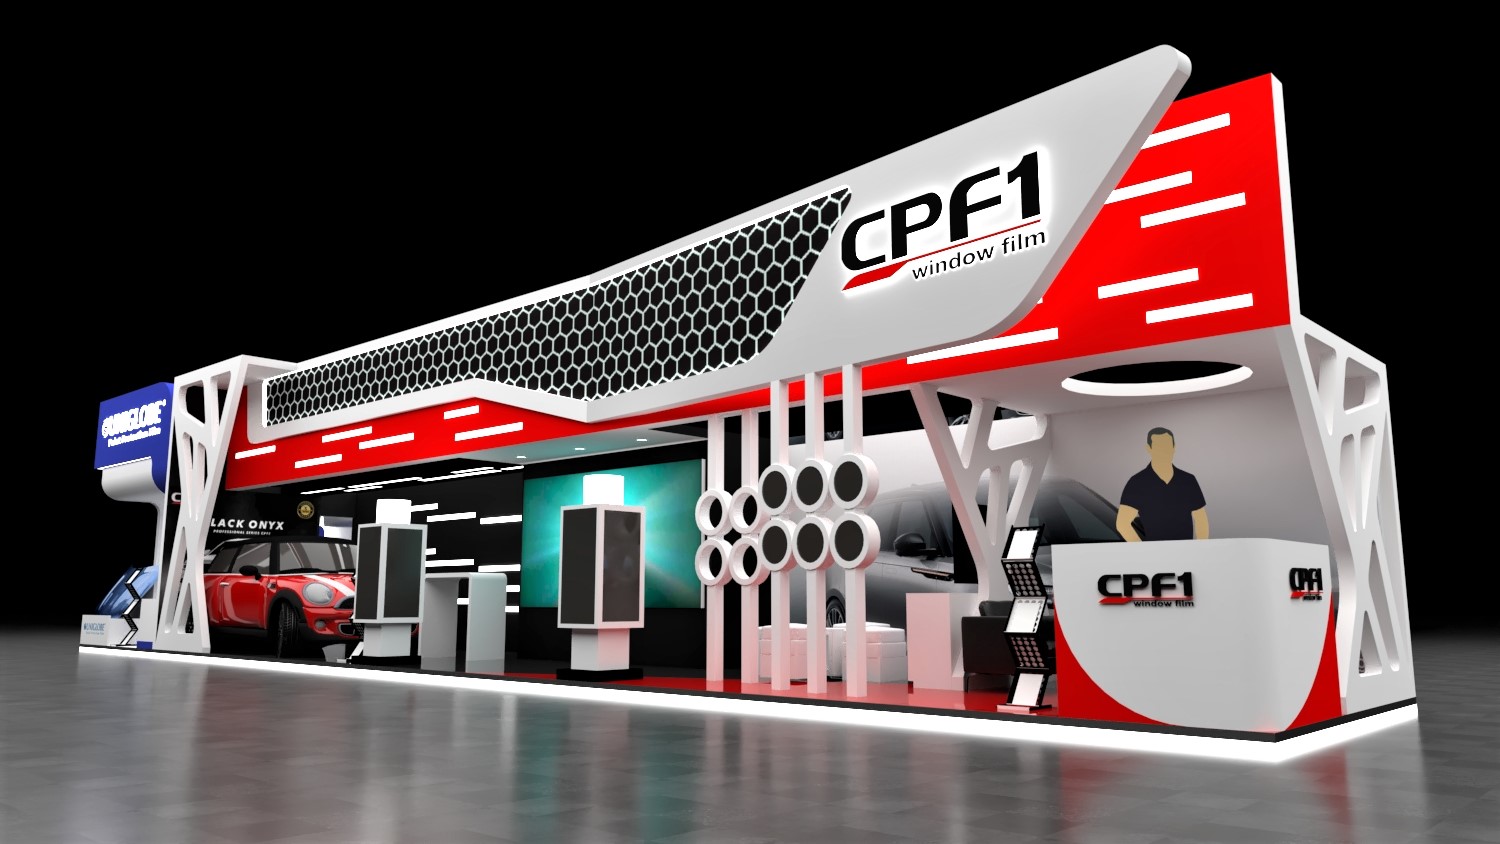 PT. Trifas Sinergi Indonesia | CPF1 booth